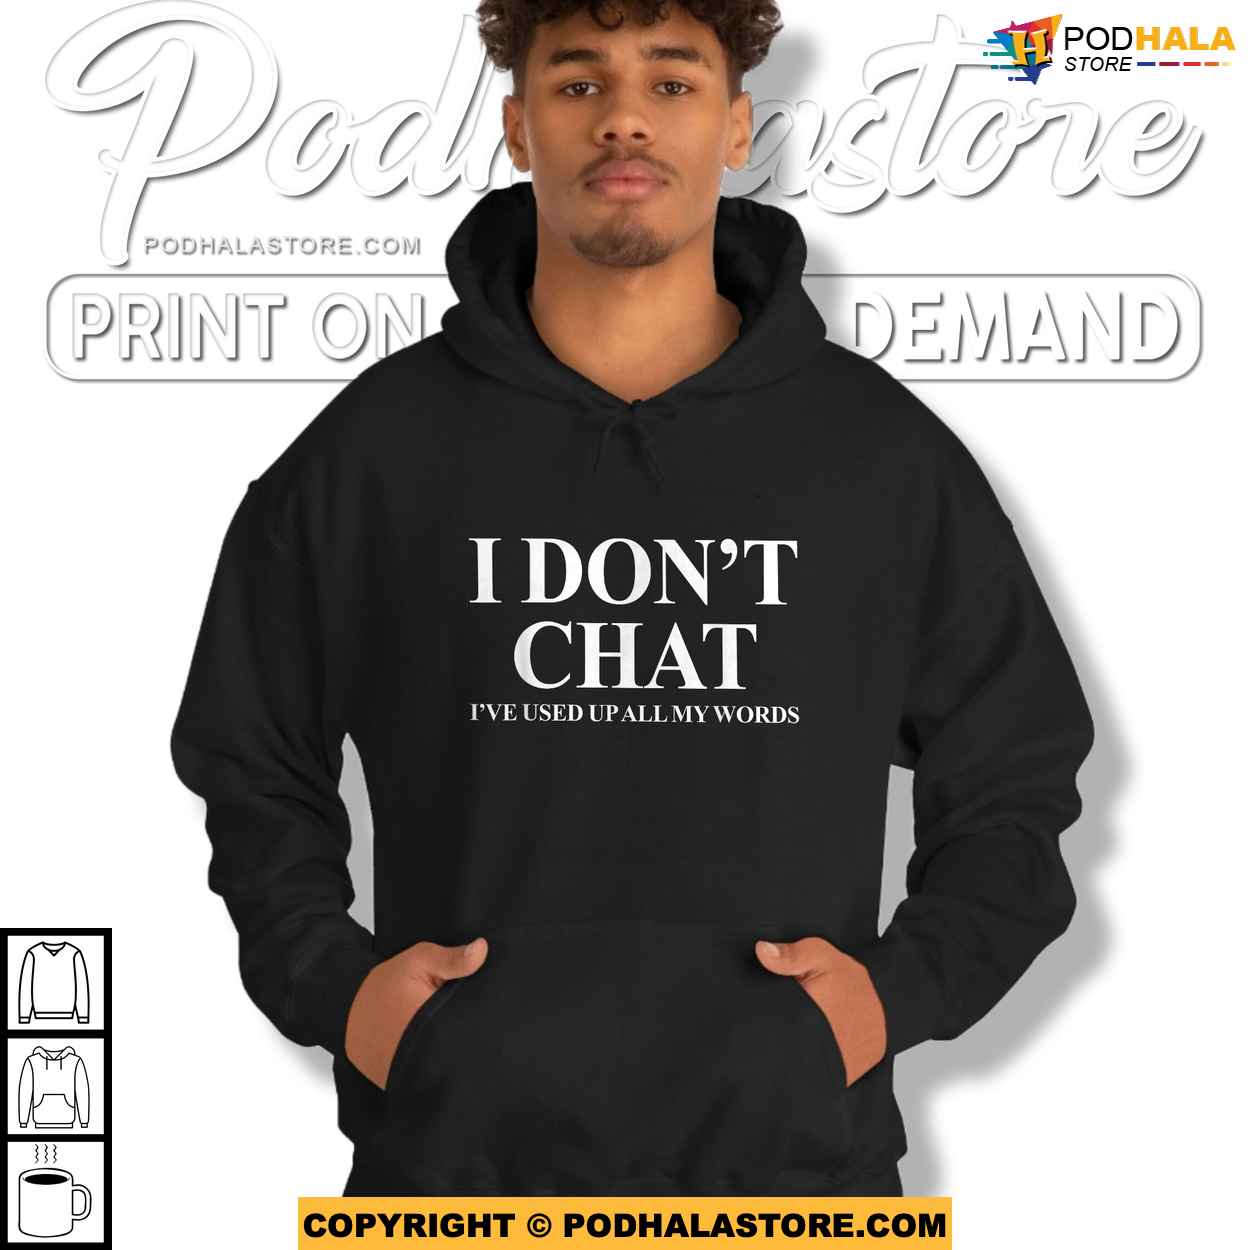 I Dont Chat Ive Used Up All My Words Funny Saying Shirt